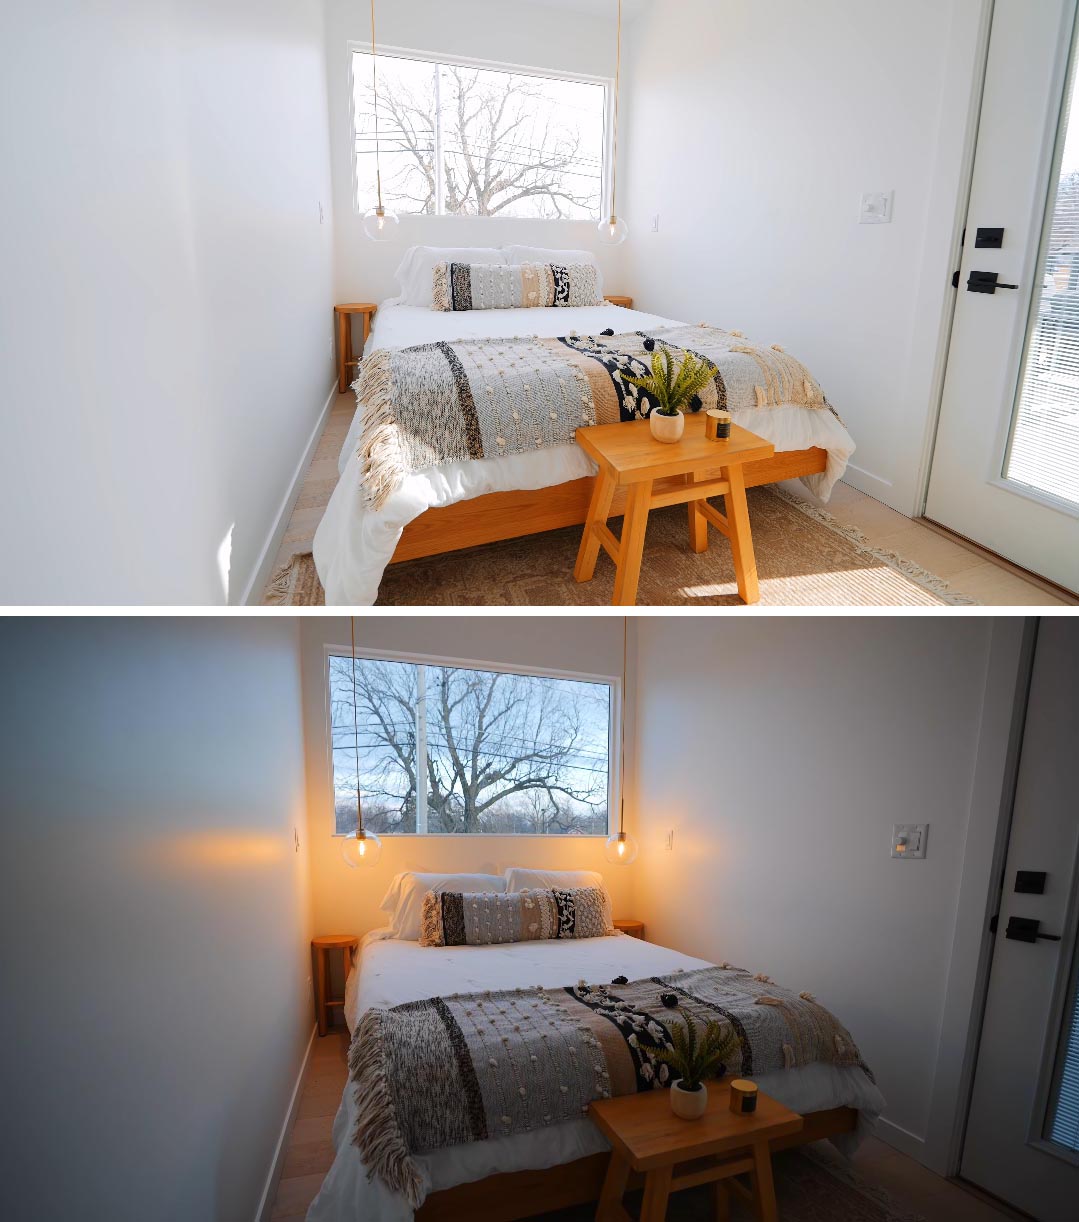 In this tiny house bedroom, large picture window provides views of the neighbourhood, while at the same, it's at a height that allows for privacy in the bedroom.